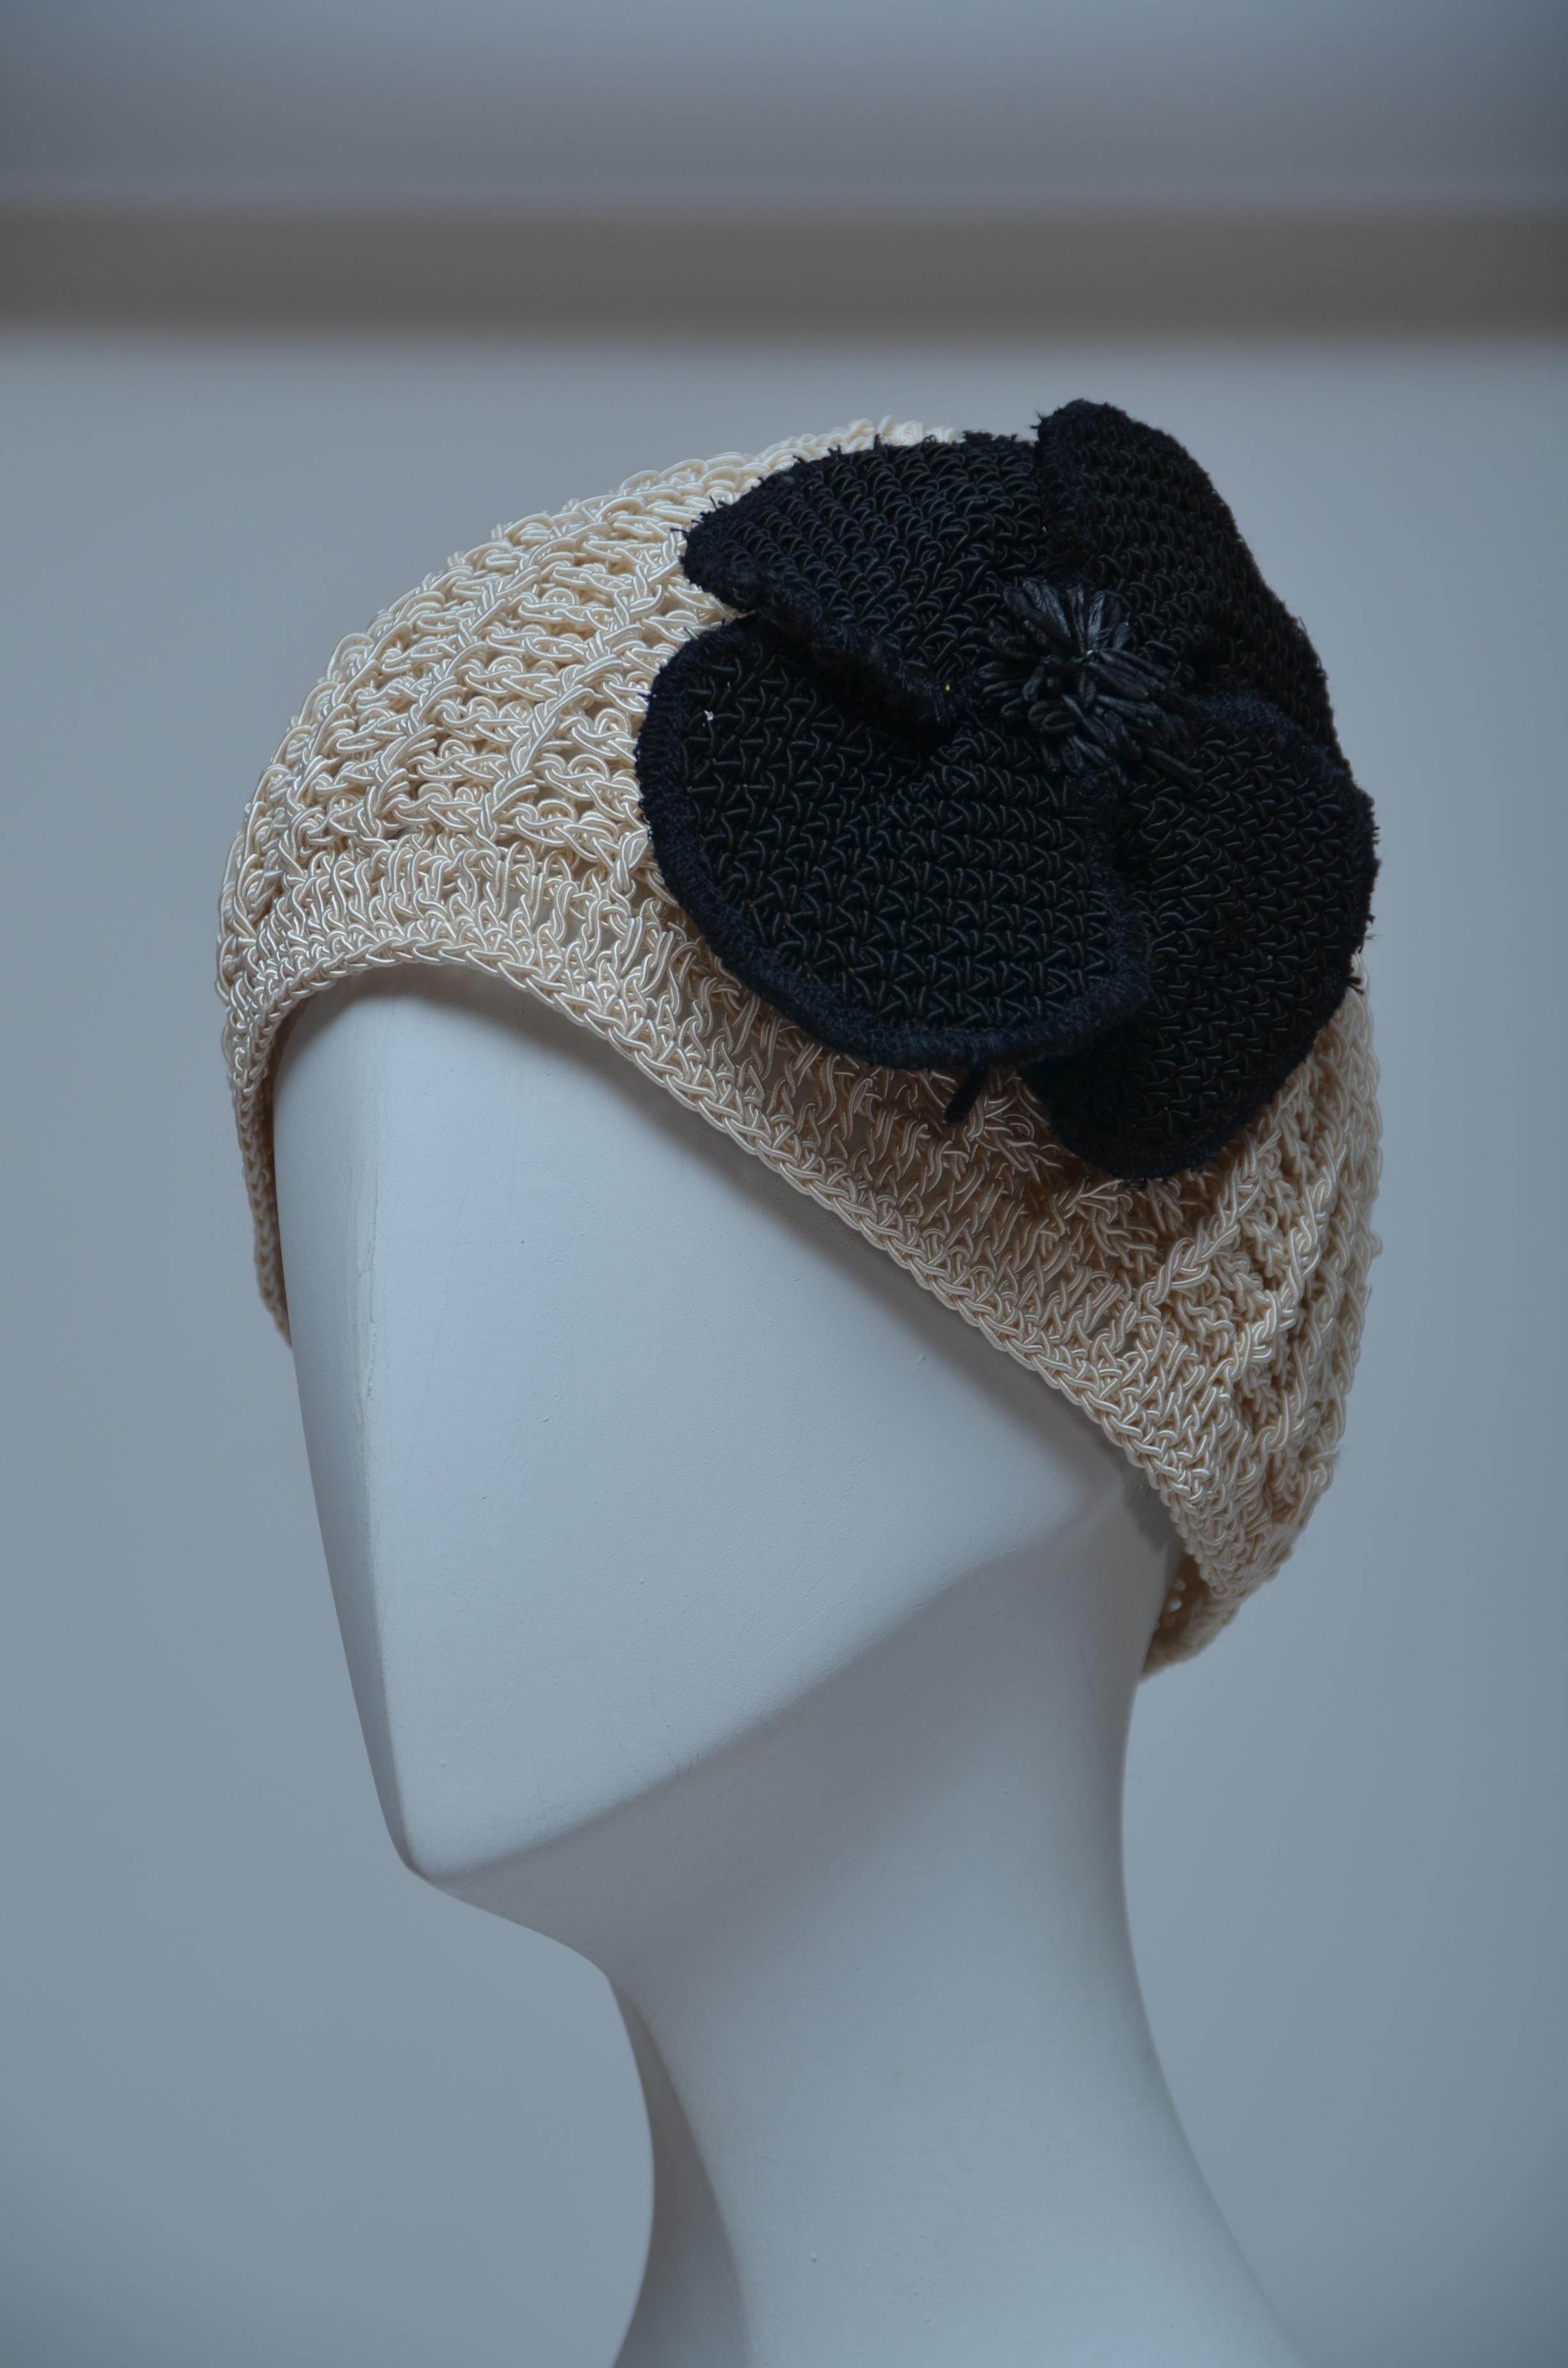 CHANEL
Crochet Camellia Beanie.
Very rare and impossible to find.
Excellent condition Looks unworn.
Large crochet black camellia can be removed 

FINAL SALE.